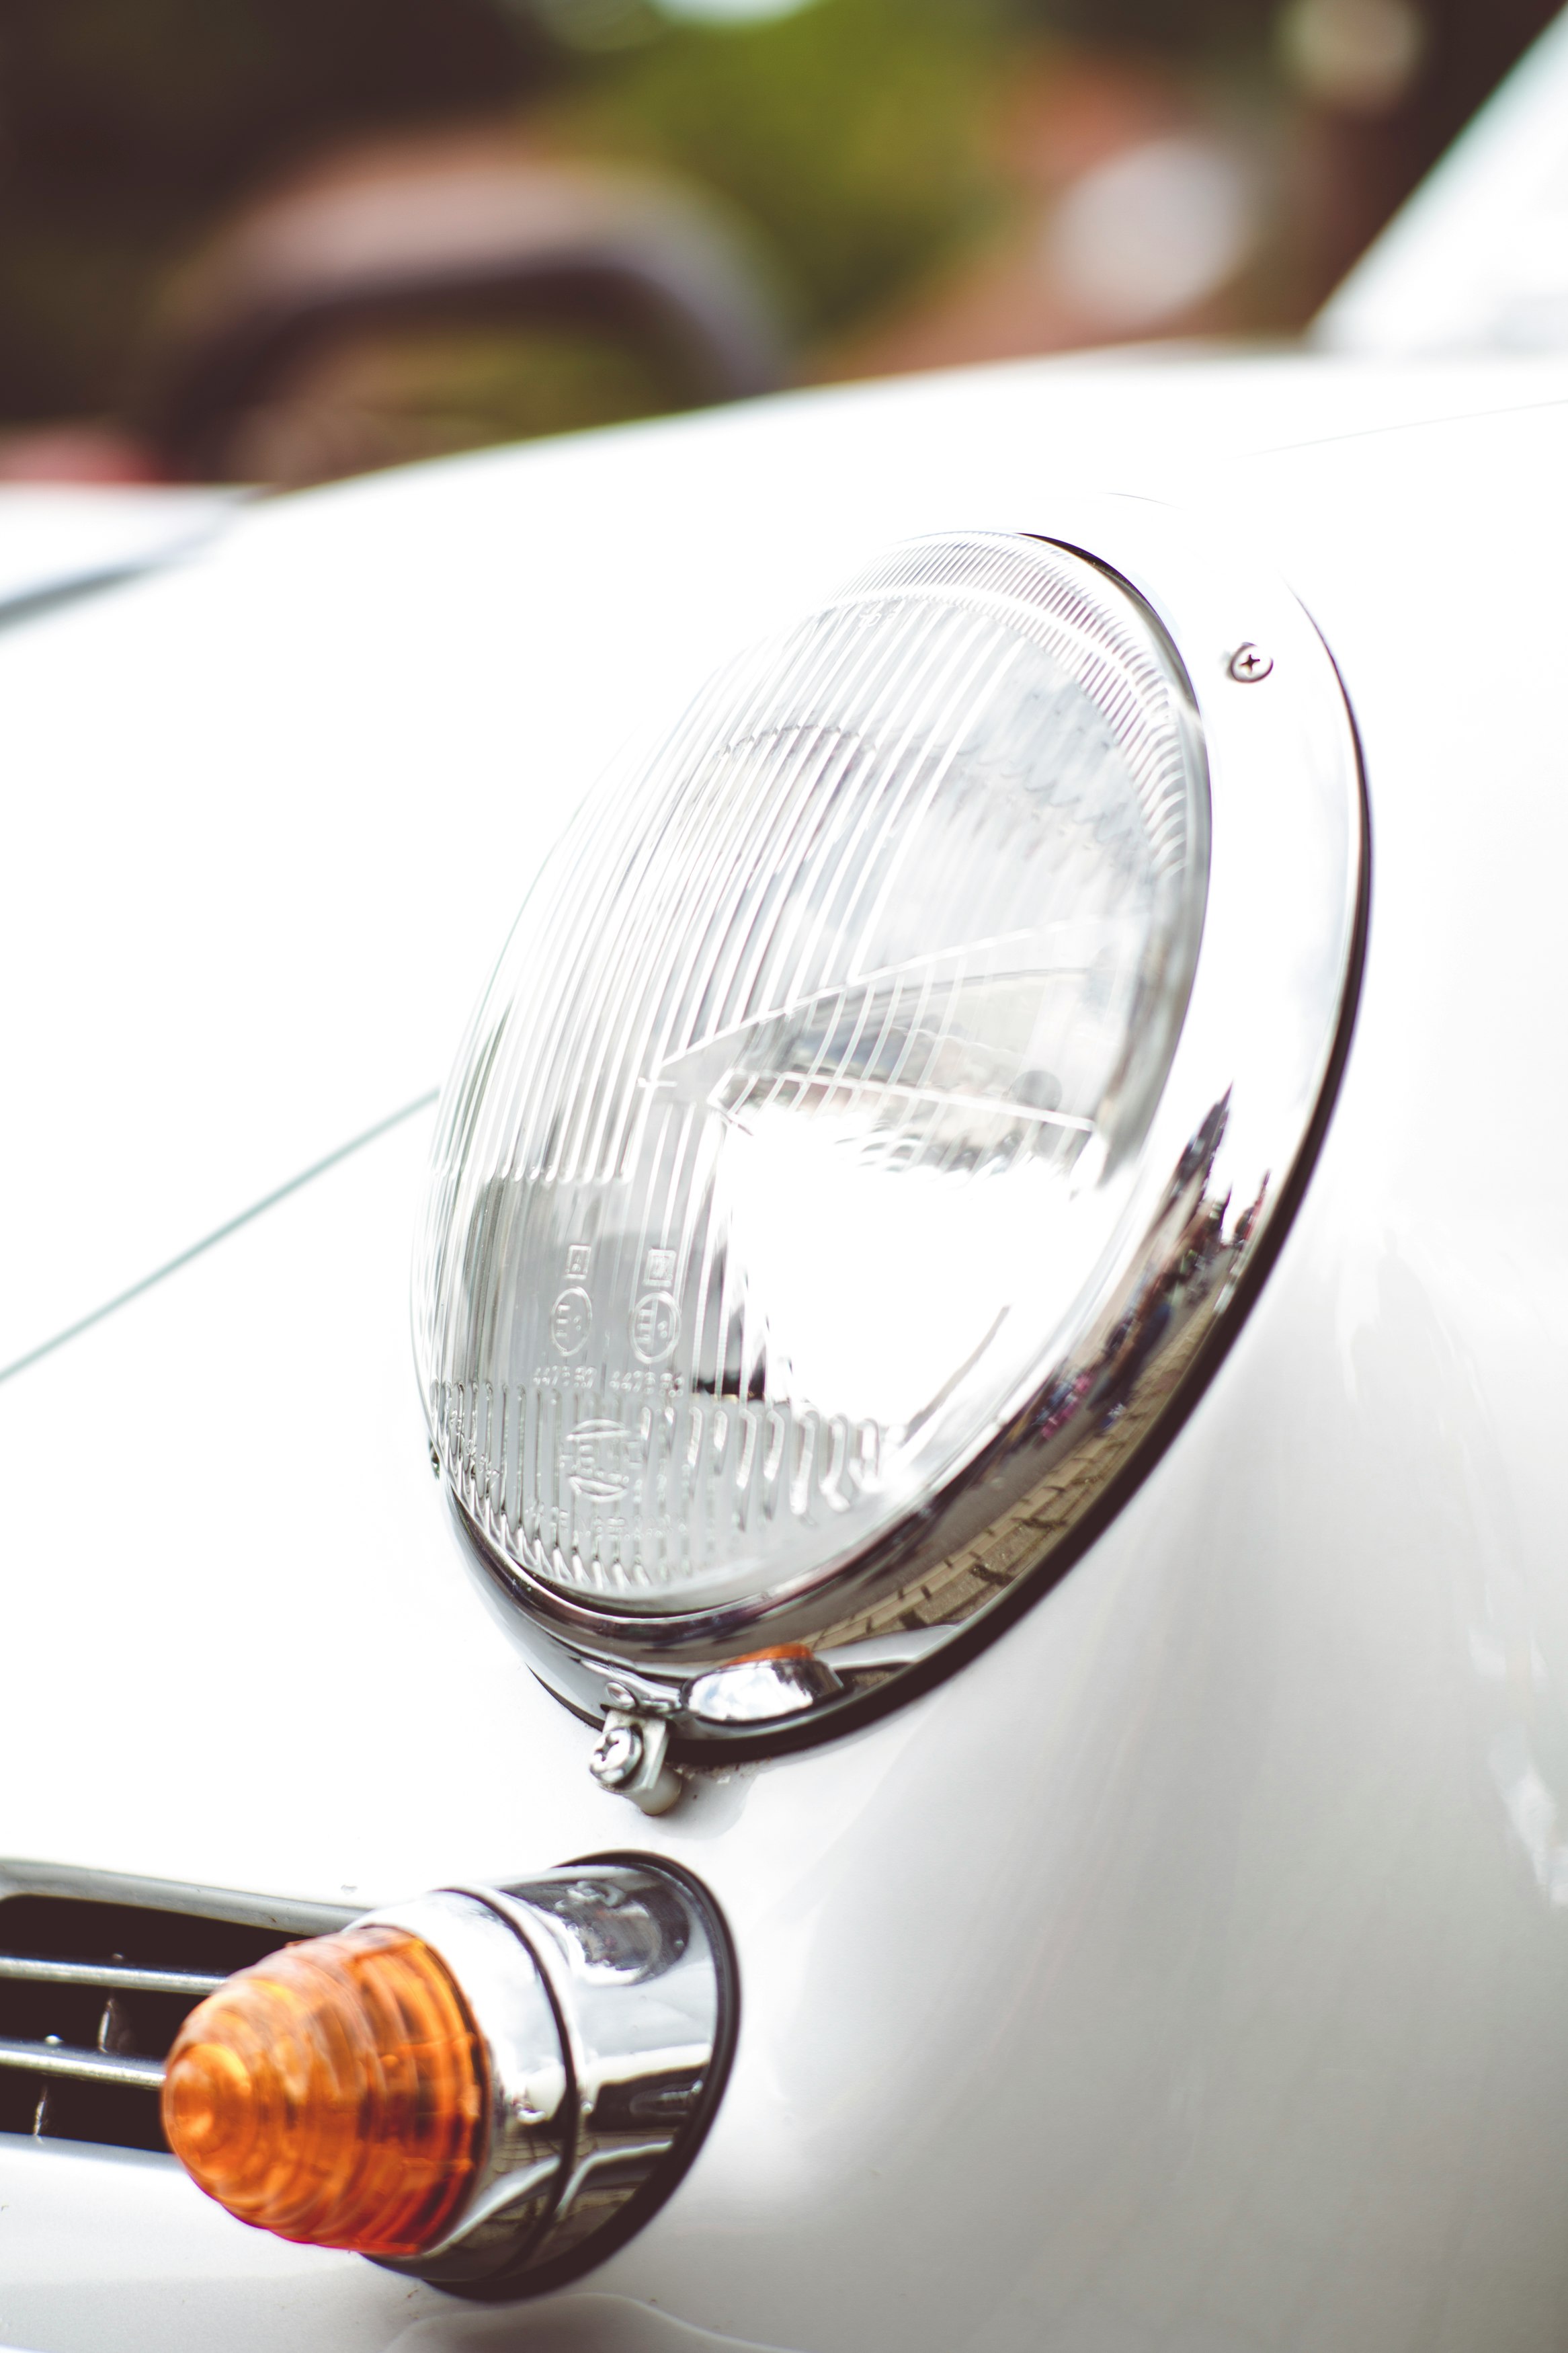 silver car headlight in close up photography